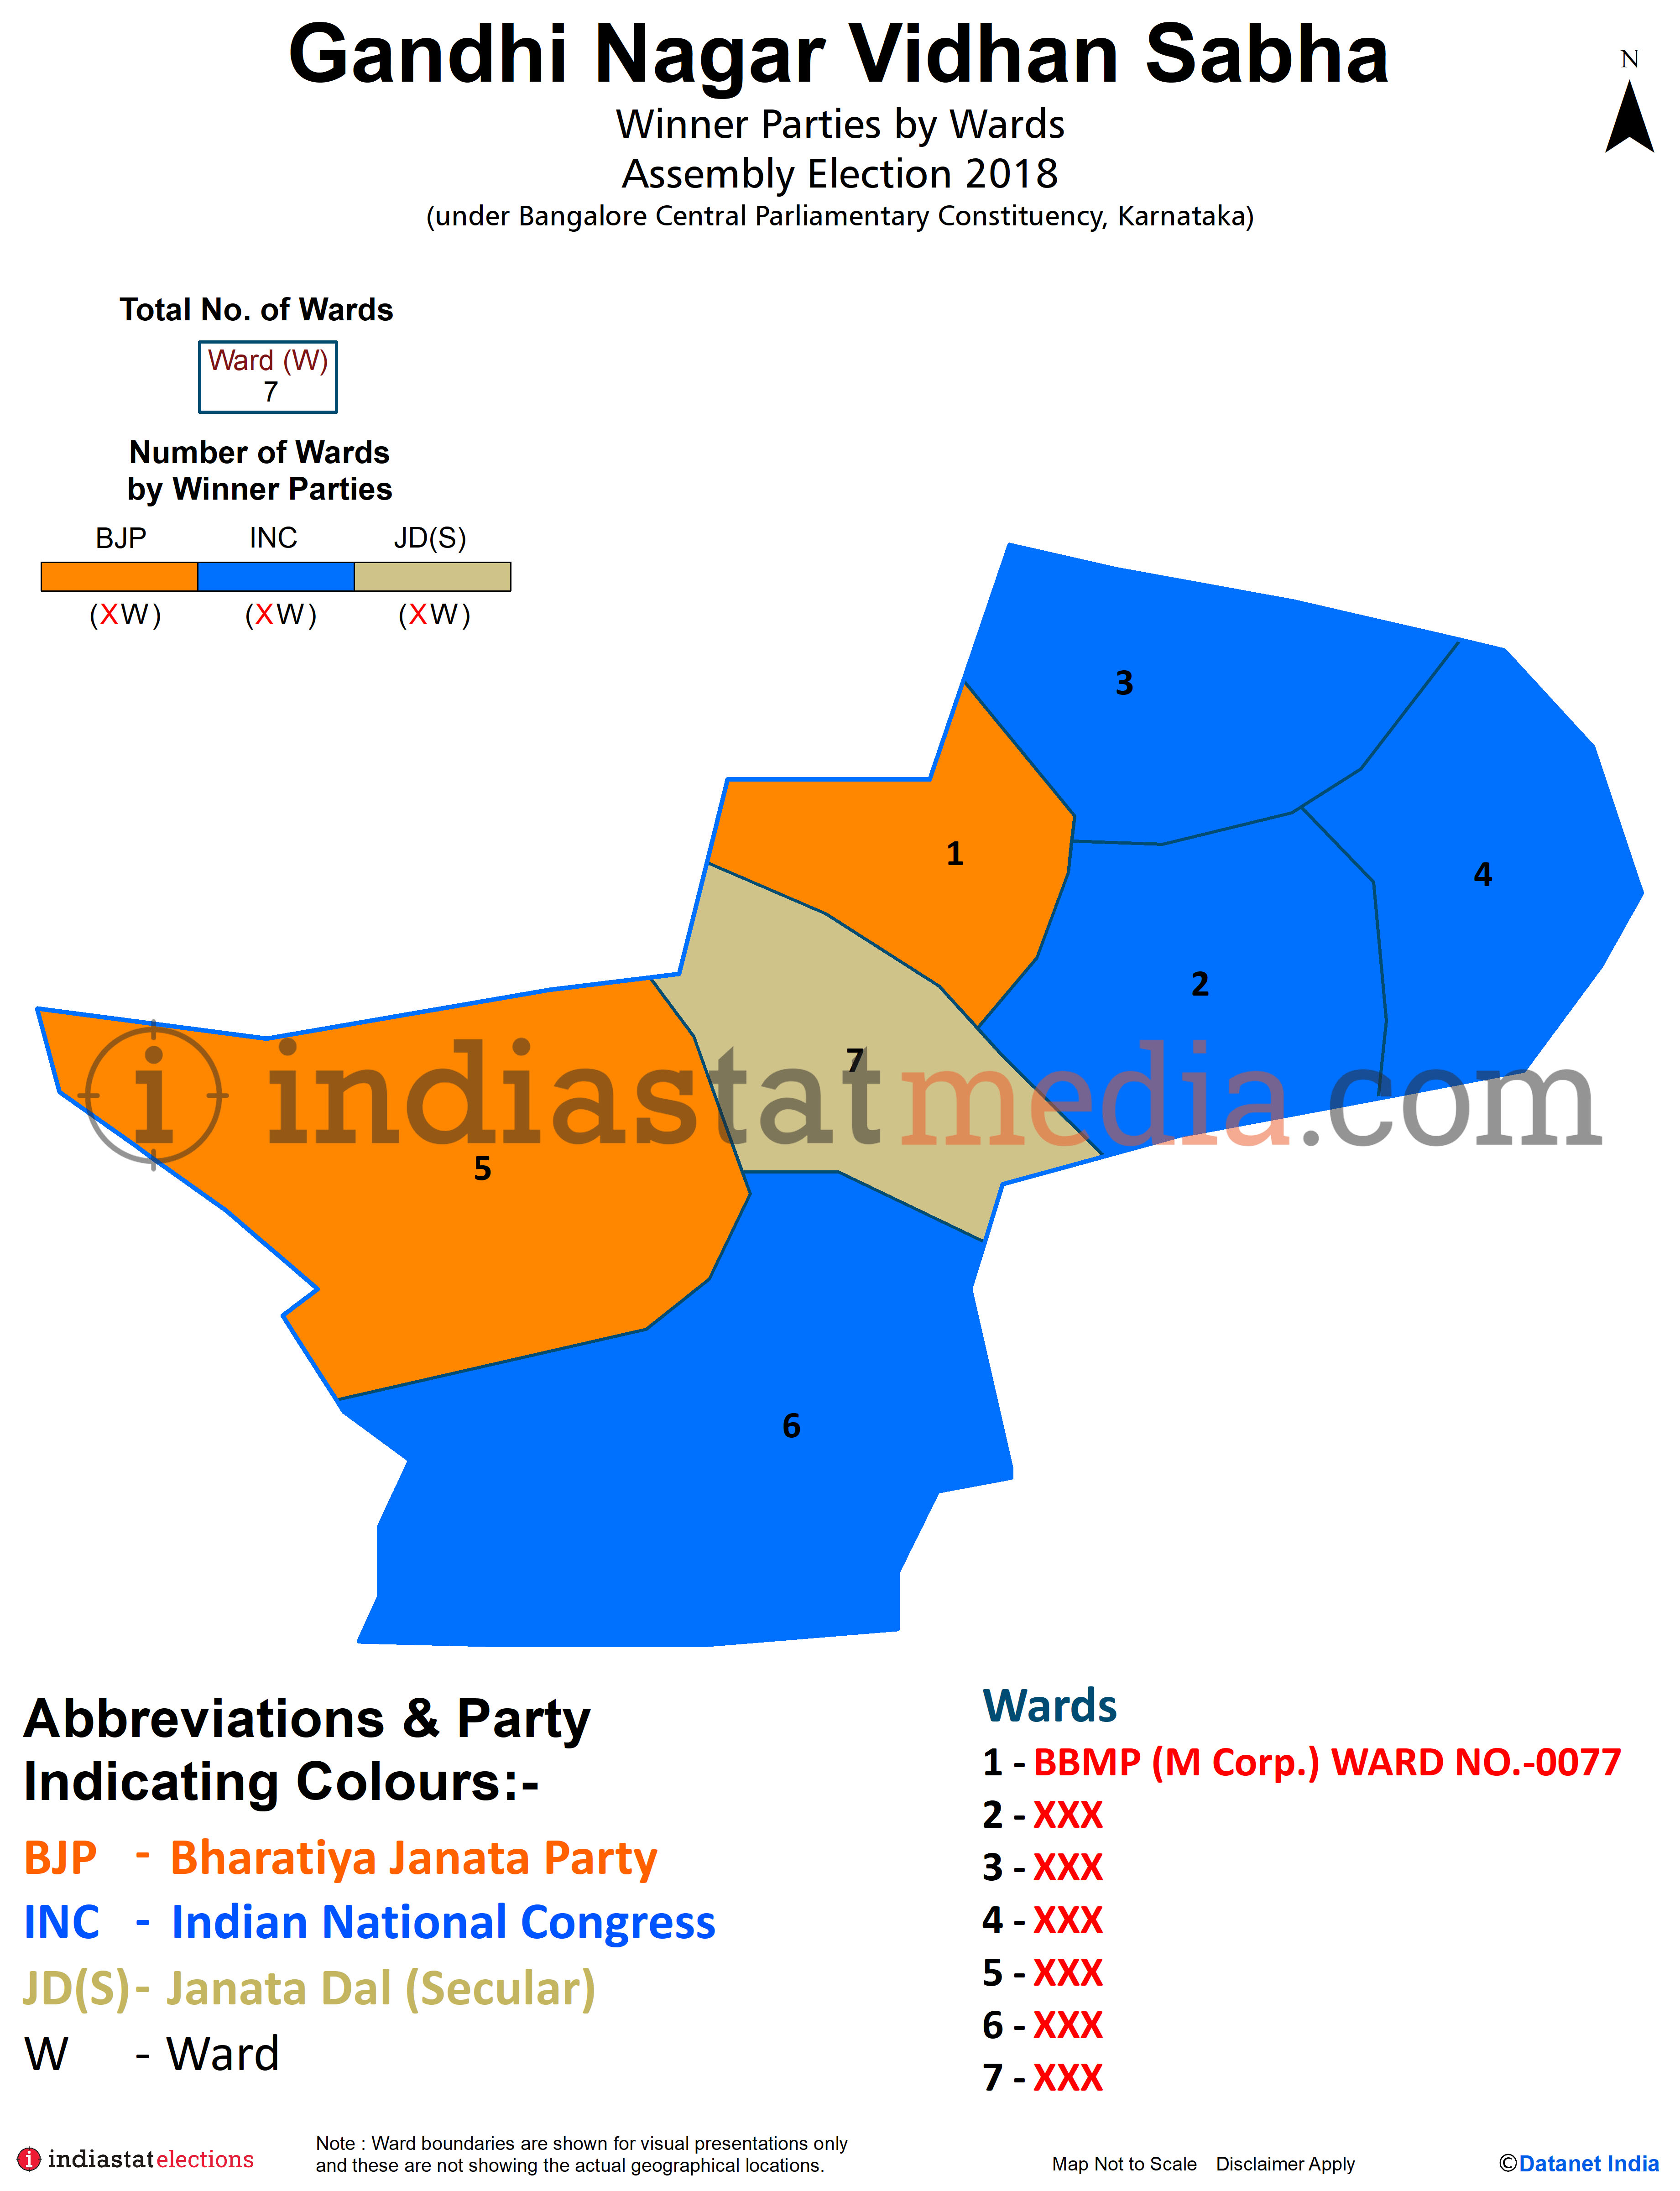 Winner Parties by Ward in Gandhi Nagar Assembly Constituency under Bangalore Central Parliamentary Constituency in Karnataka (Assembly Election - 2018)